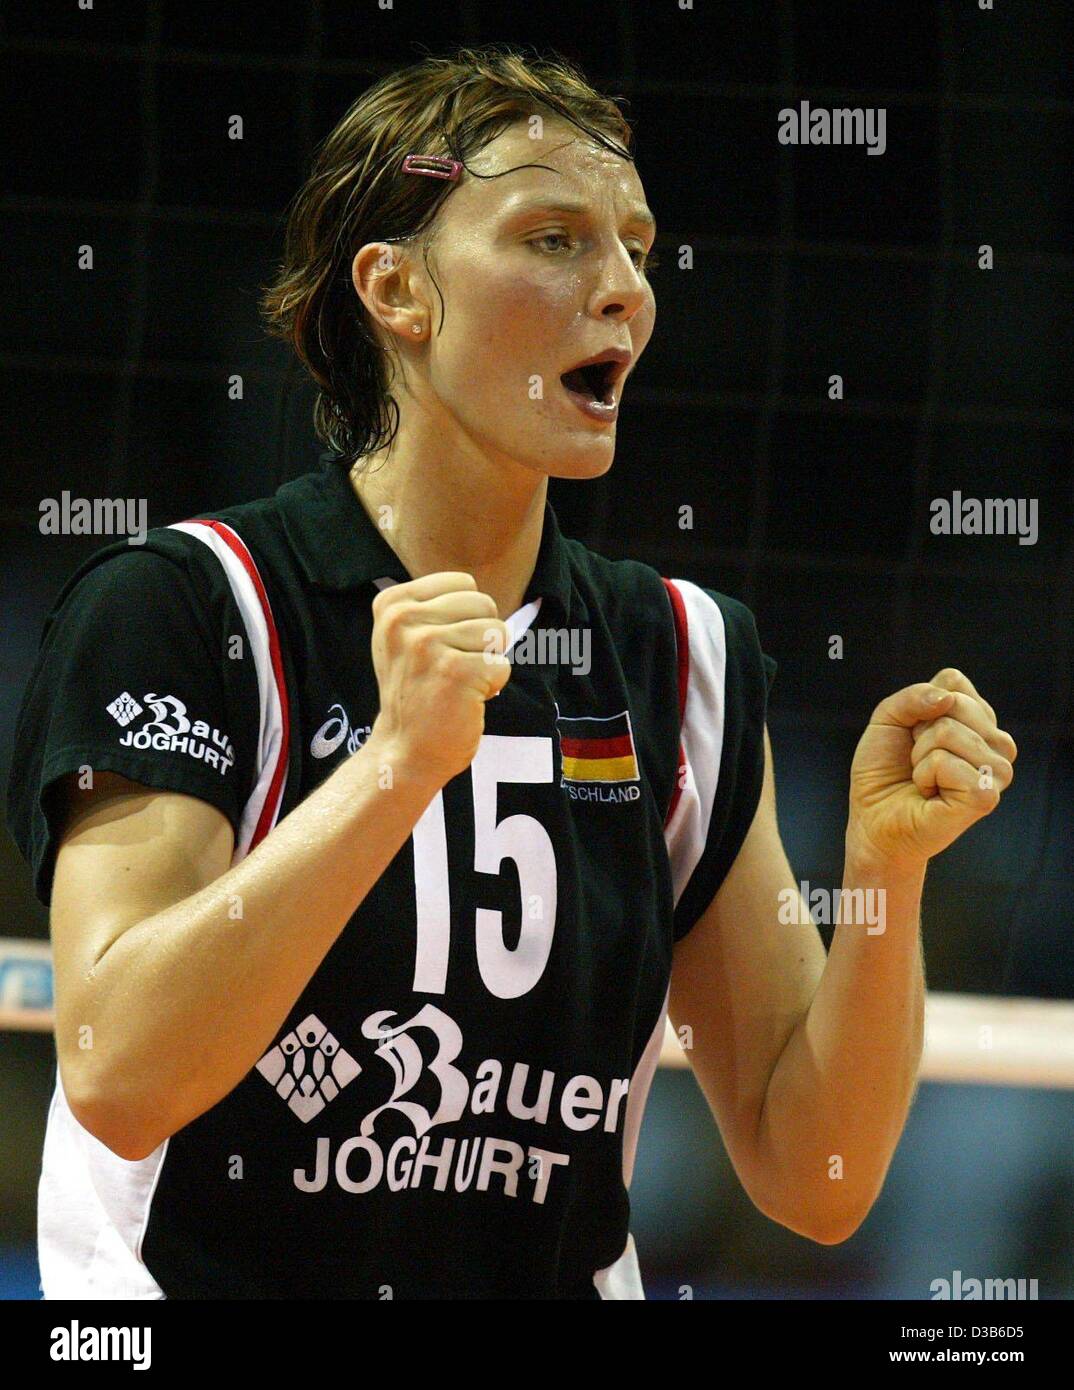 (dpa) - German hitter Angelina Gruen jubilates after scoring a point during the match against Czechia in the Women's Volleyball World Championships in Muenster, Germany, 30 August 2002. The match ended 3:2 for Germany. Stock Photo